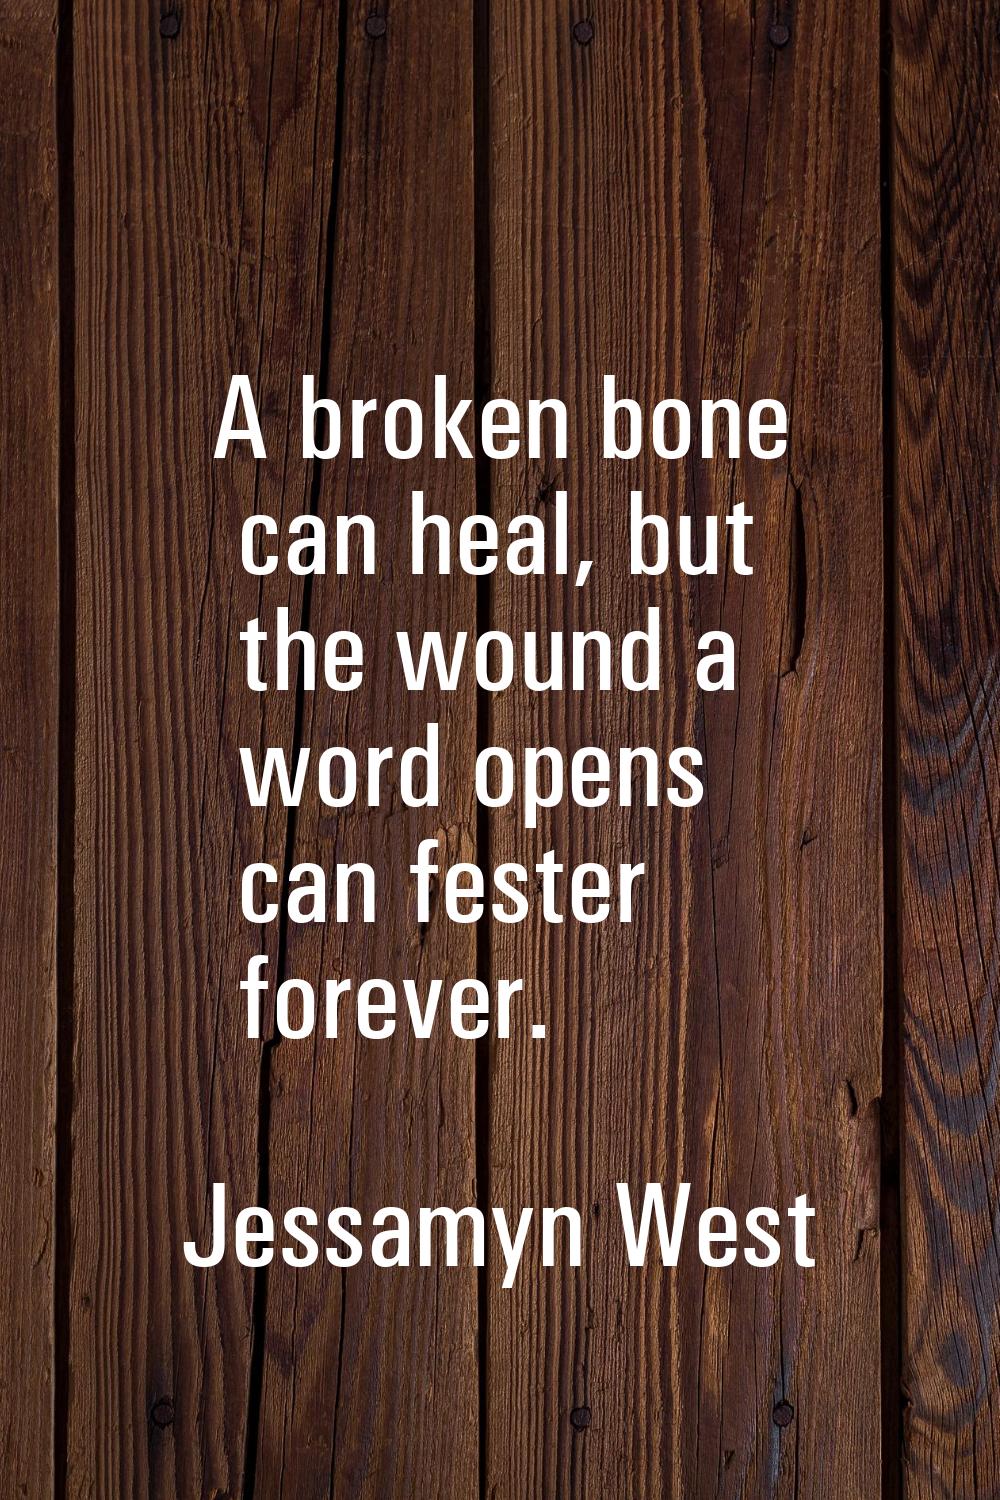 A broken bone can heal, but the wound a word opens can fester forever.